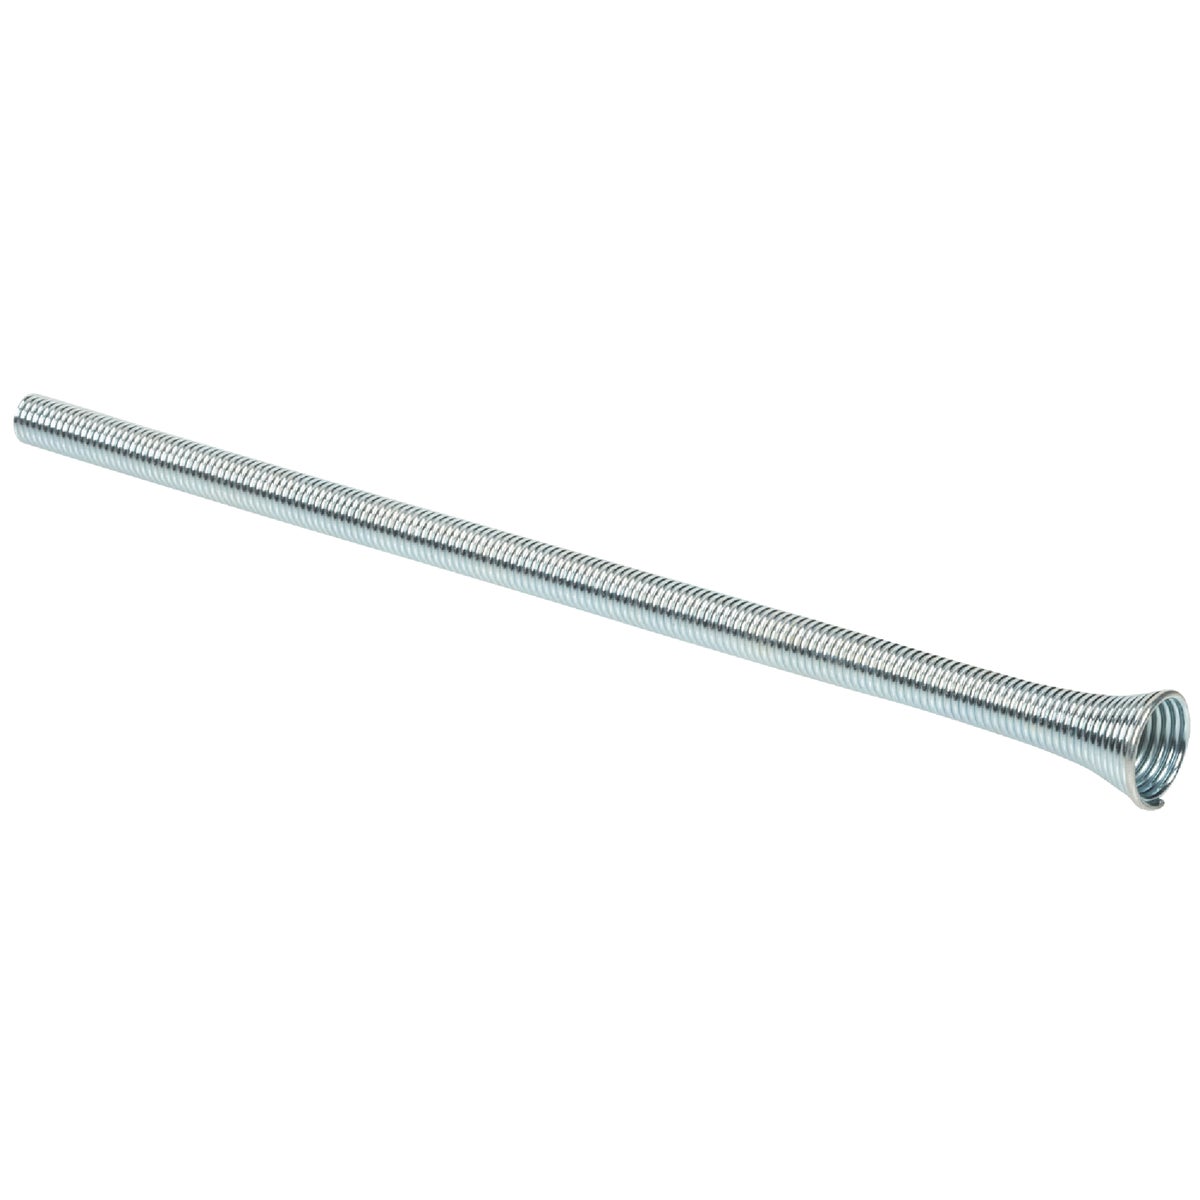 Item 453447, For bending soft copper and aluminum tubing. Order by tube O.D.